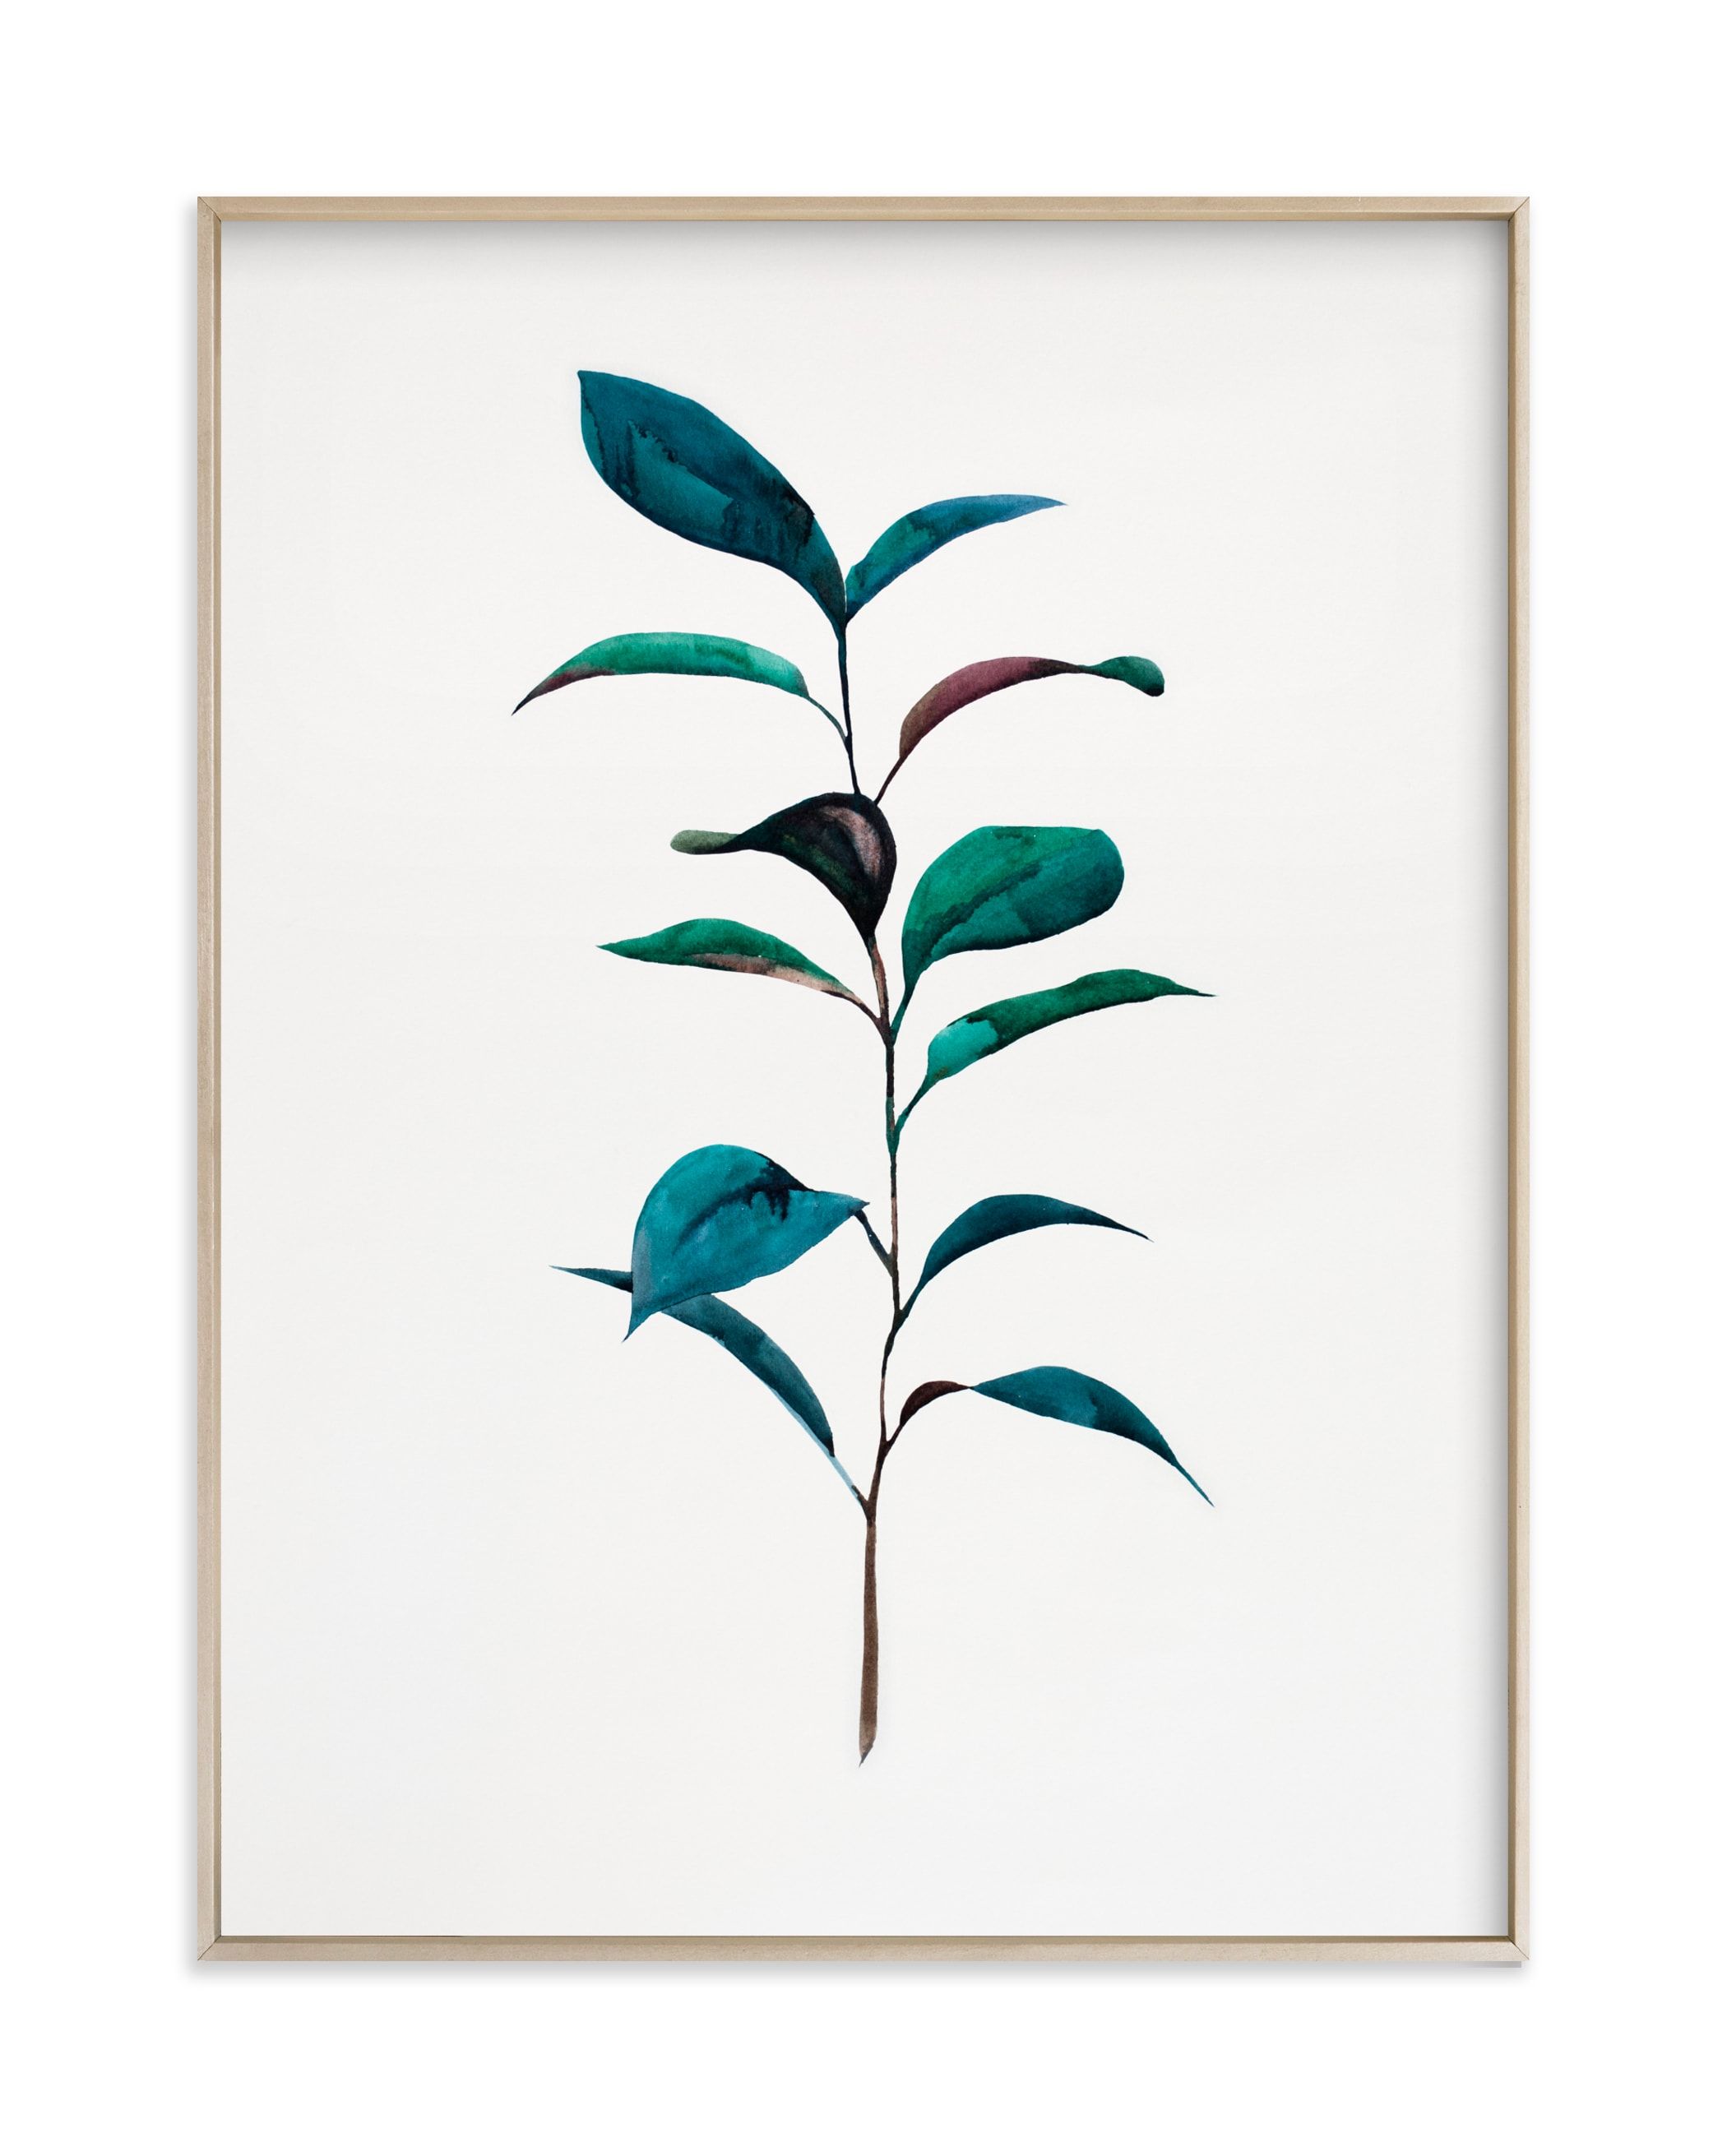 "Ruscus" - Grownup Open Edition Non-custom Art Print by jinseikou. | Minted